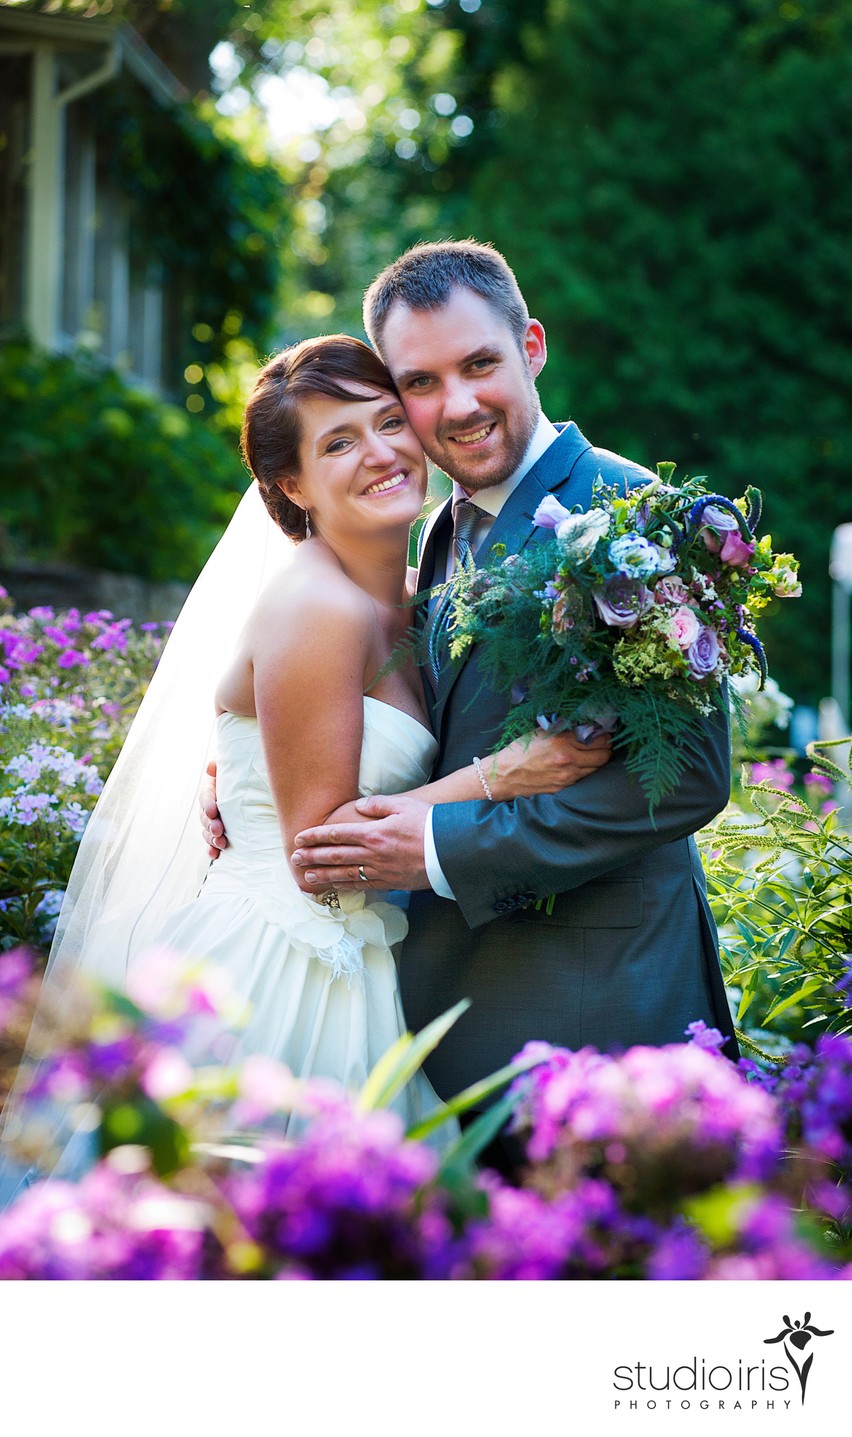 Bride and groom embracing and looking deeply happy in flower garden